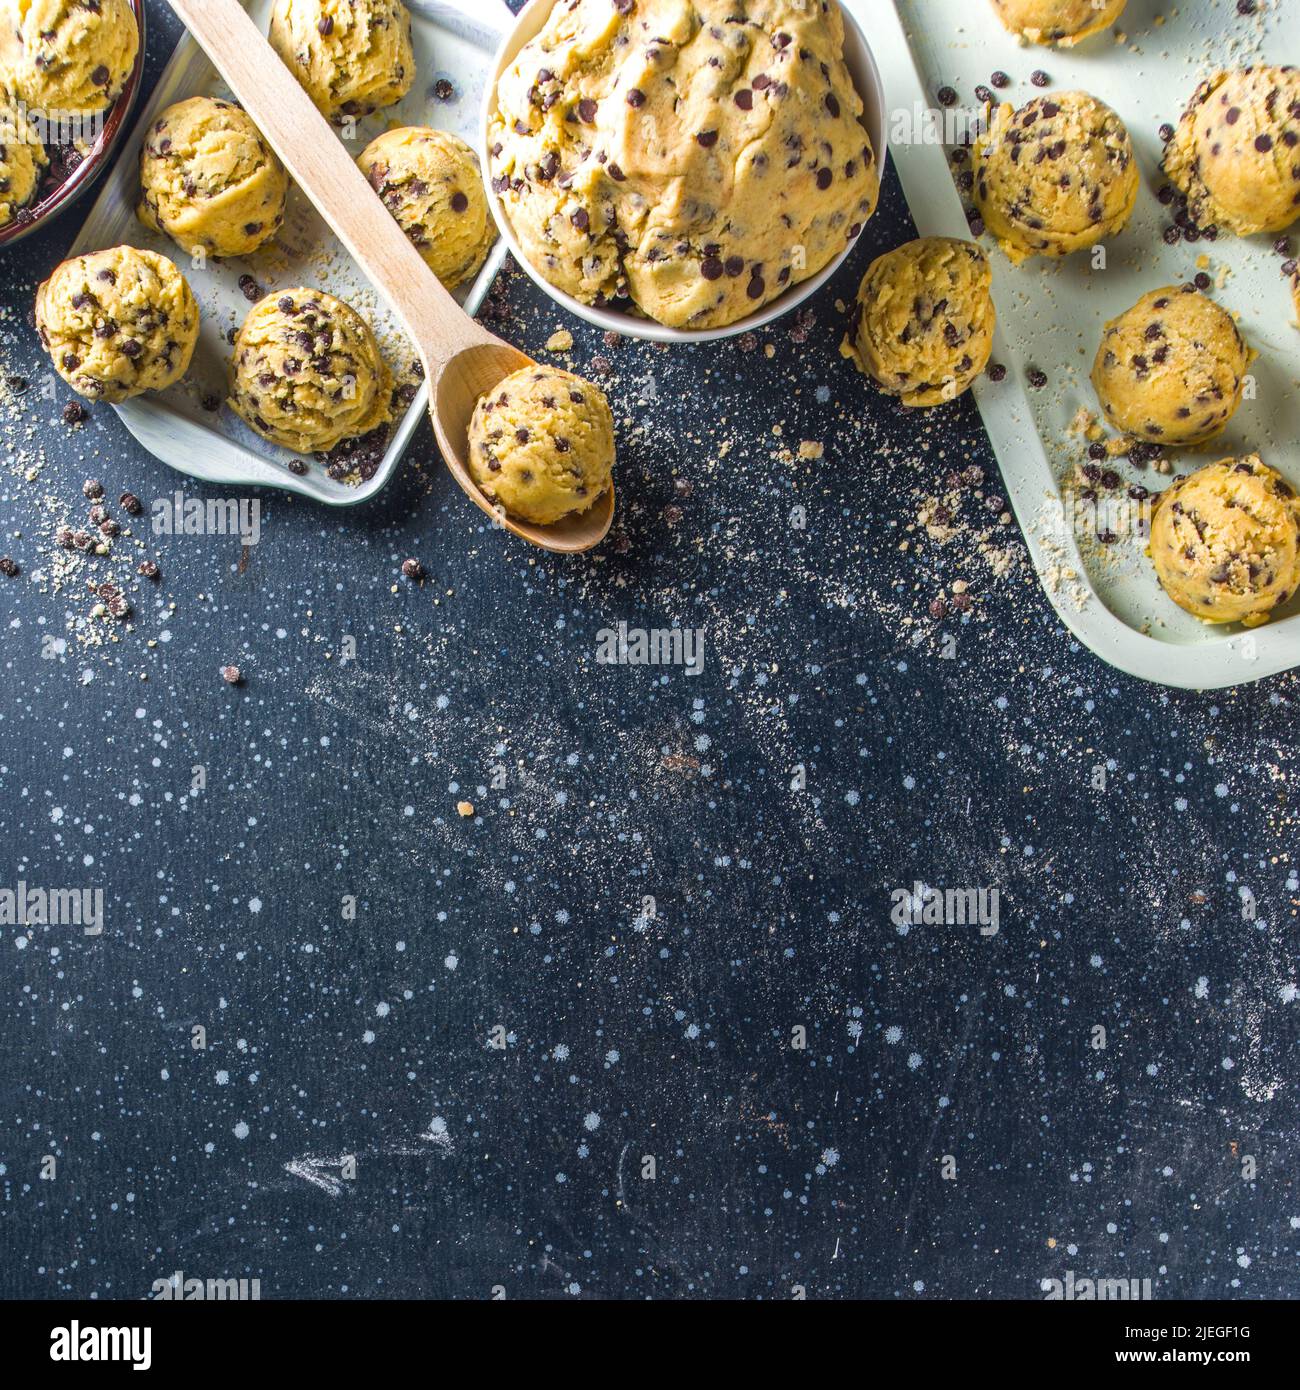 https://c8.alamy.com/comp/2JEGF1G/edible-raw-dough-american-dessert-edible-raw-cookie-dough-with-chocolate-drops-in-small-bowl-and-on-baking-sheets-dark-blue-background-copy-space-2JEGF1G.jpg